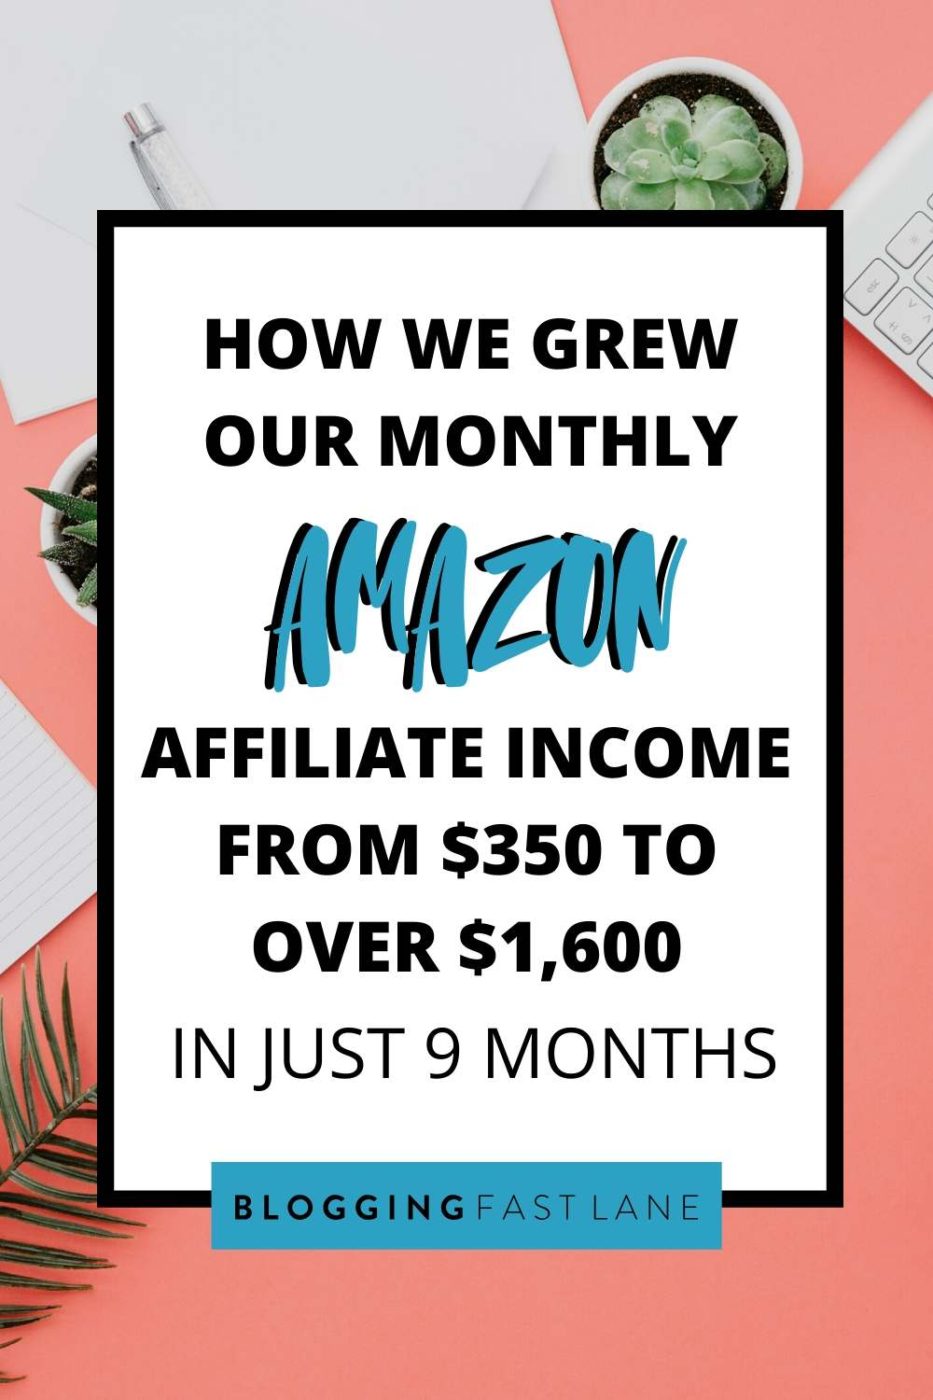 Case Study | How We Grew Our Monthly Amazon Affiliate Income from $350 to Over $1,600 in 9 Months